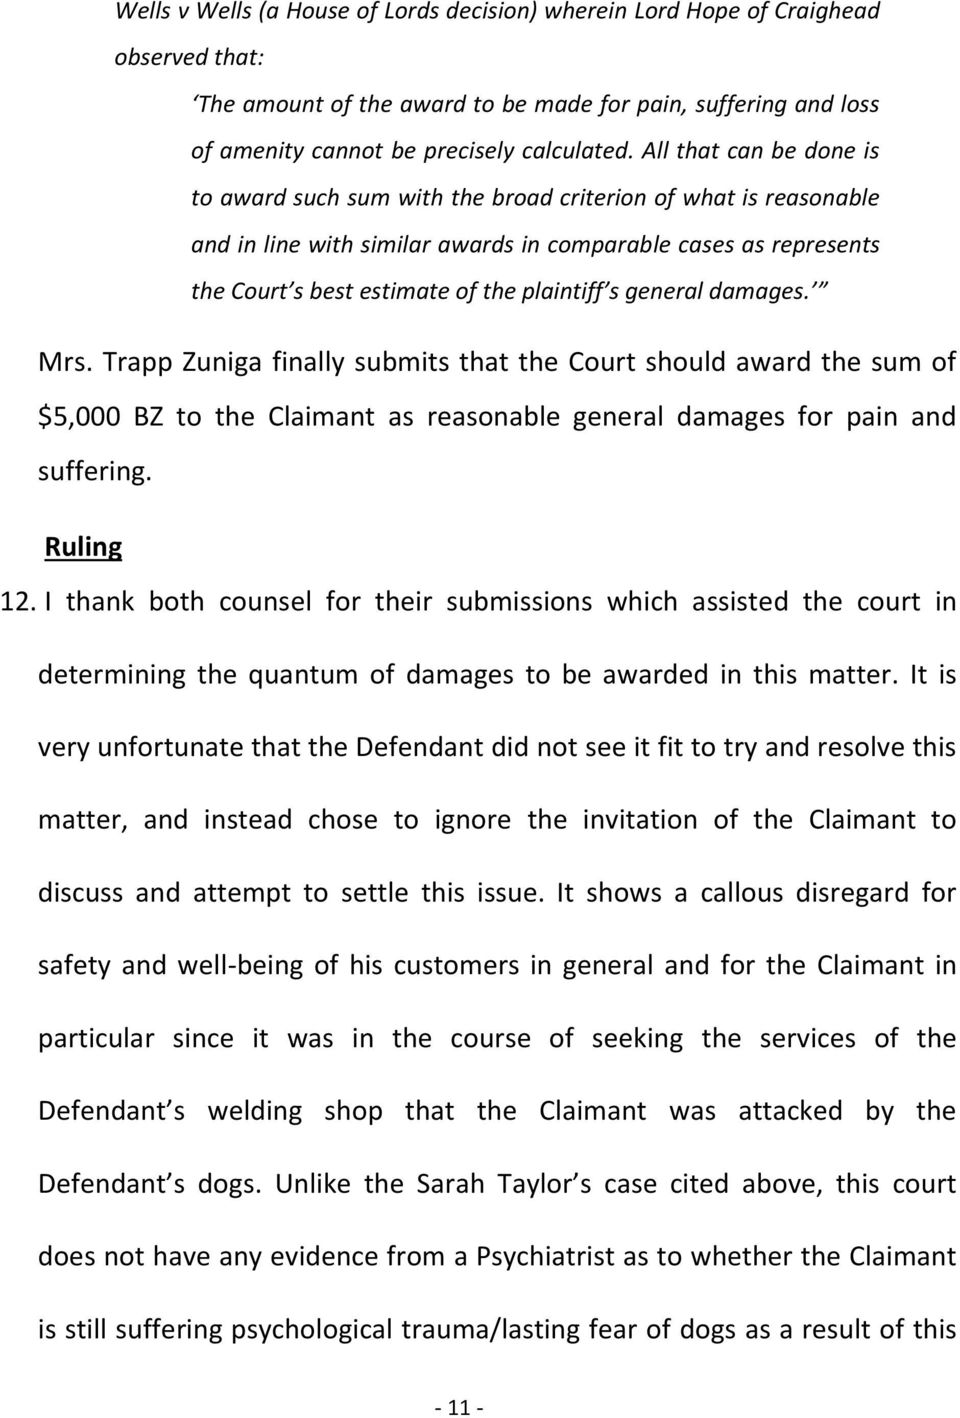 general damages. Mrs. Trapp Zuniga finally submits that the Court should award the sum of $5,000 BZ to the Claimant as reasonable general damages for pain and suffering. Ruling 12.